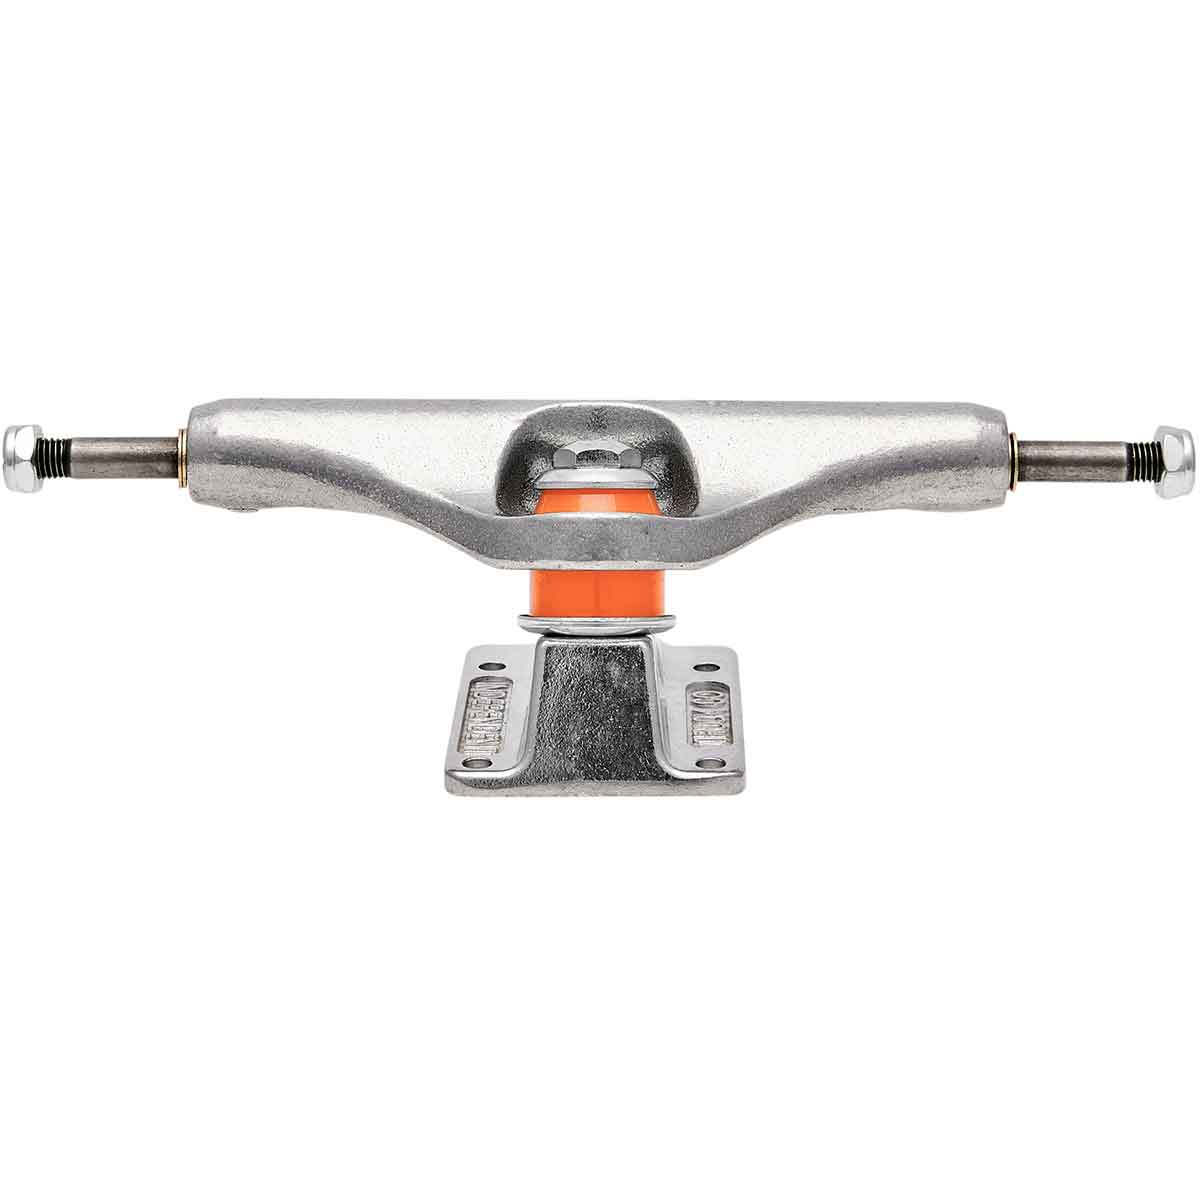 Independent 149mm Forged Hollow Mid Skateboard Trucks - Silver 